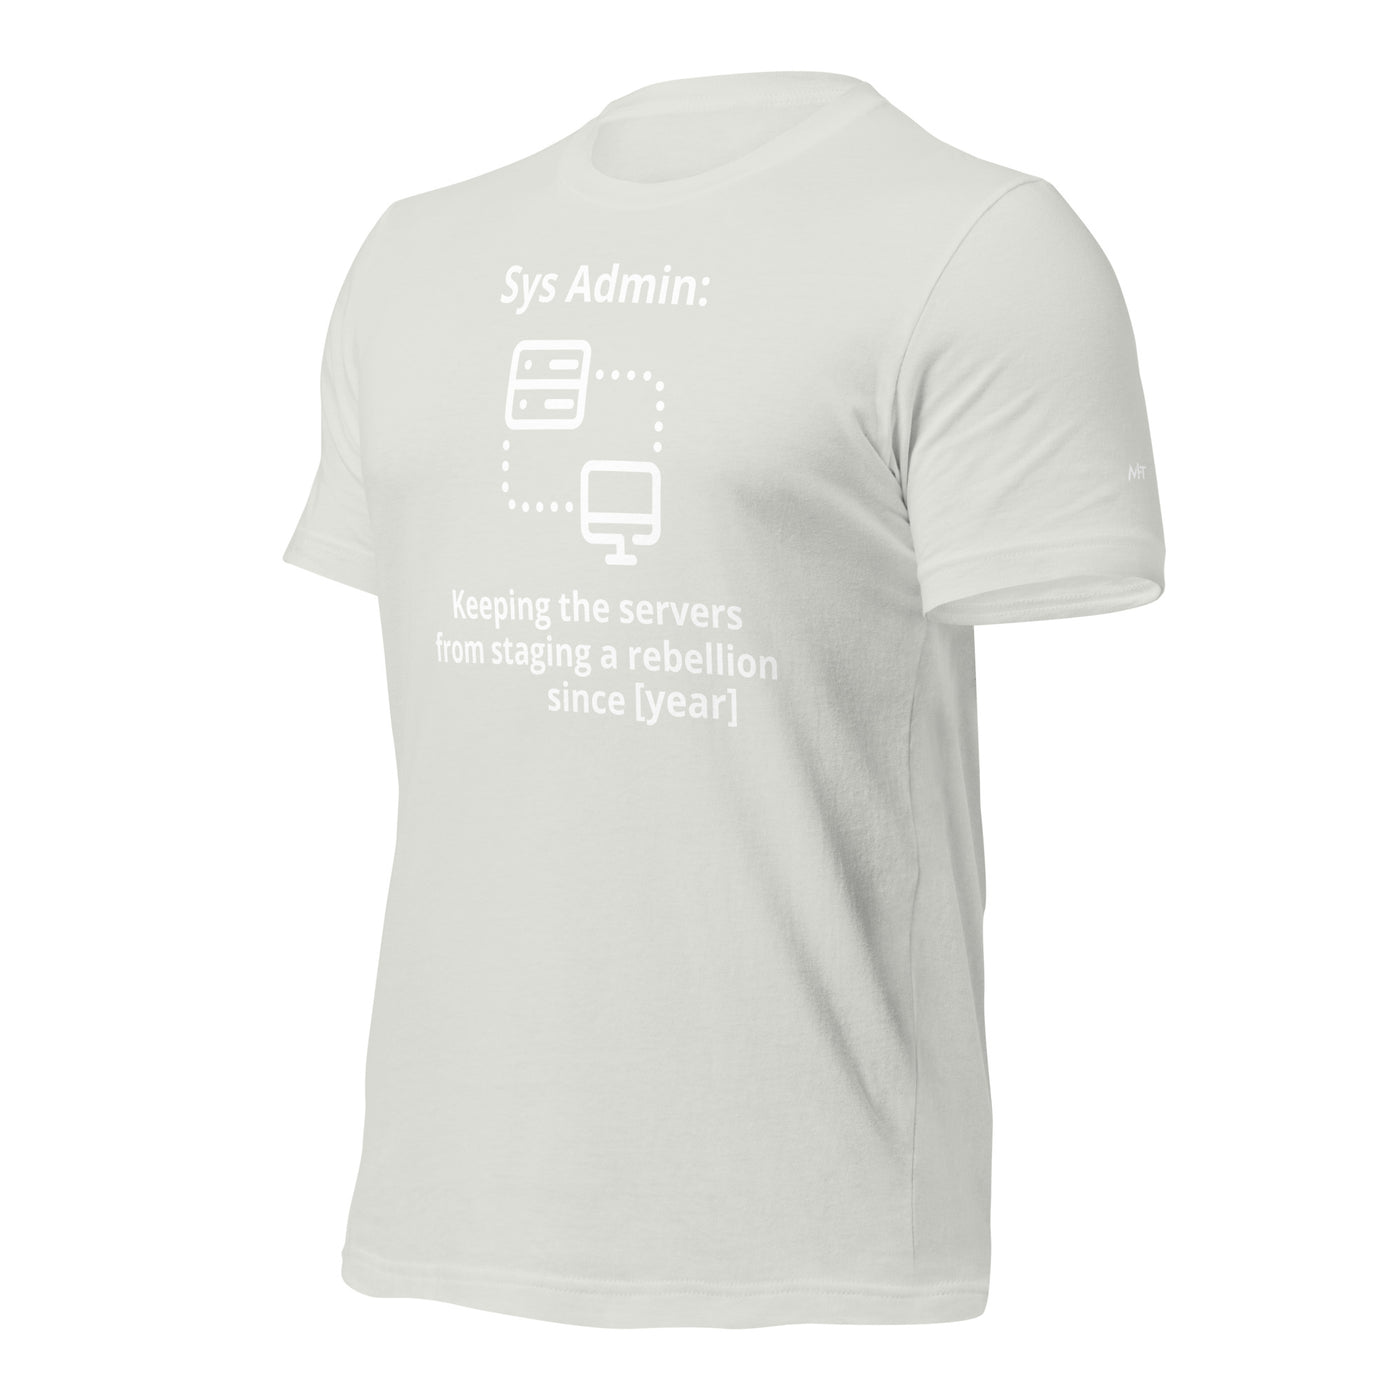 Keeping the servers from staging a rebellion since [insert year here] - Unisex t-shirt